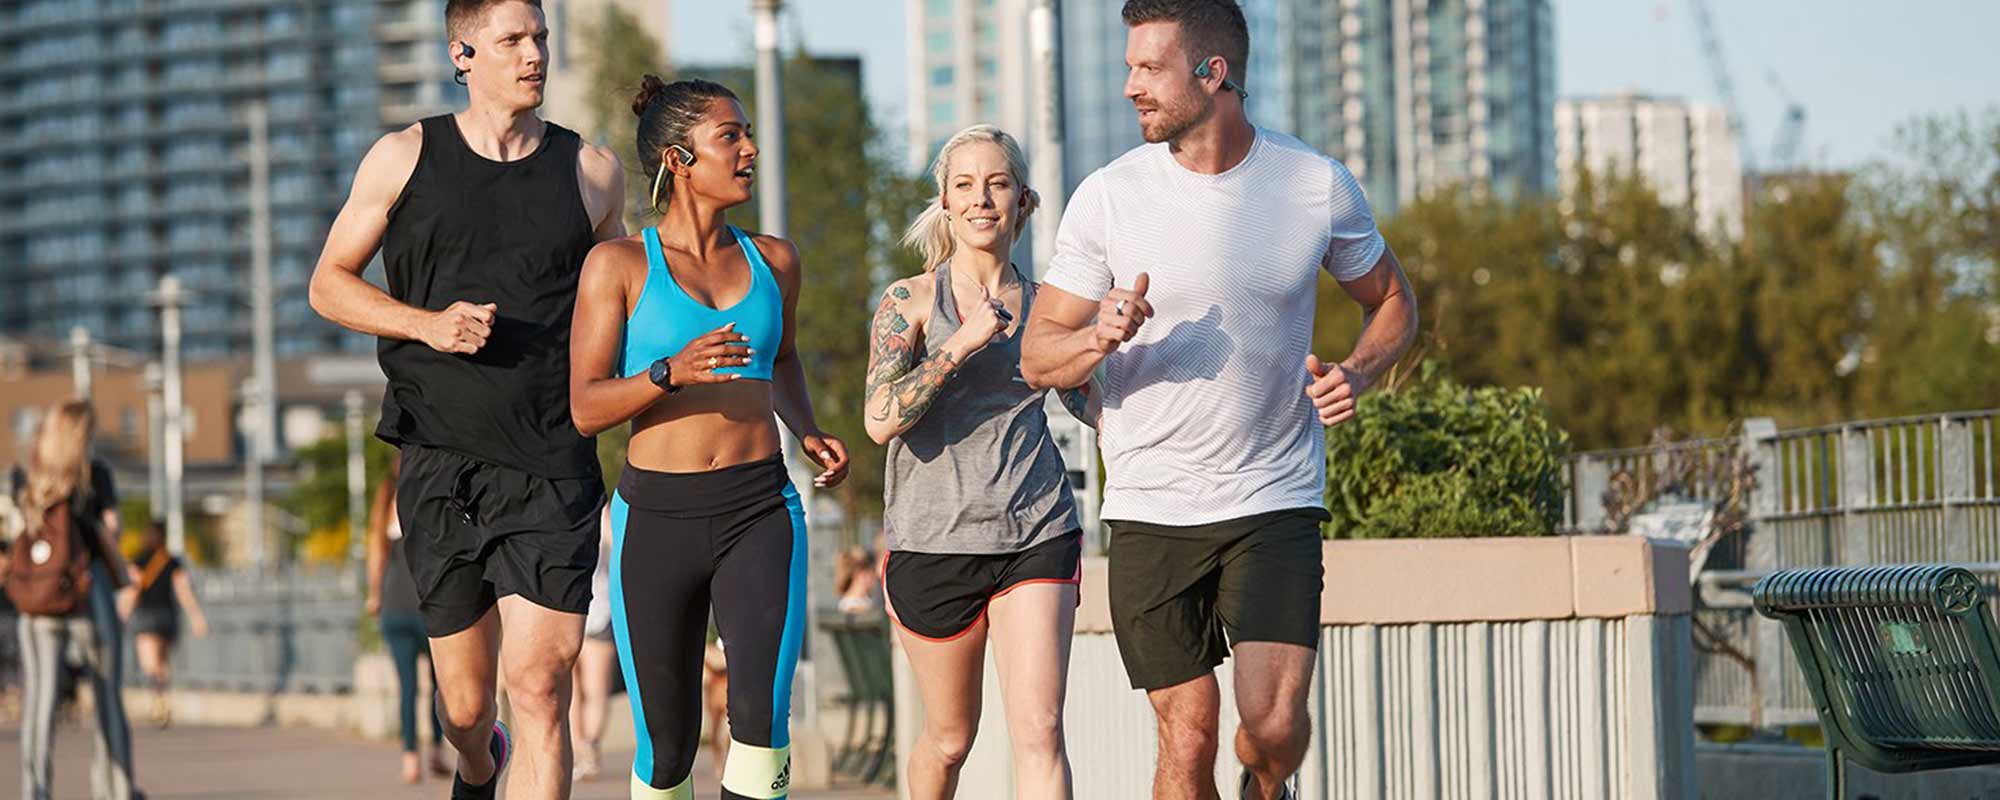 Want to Join a Run Crew? Here’s How You Can Get Started